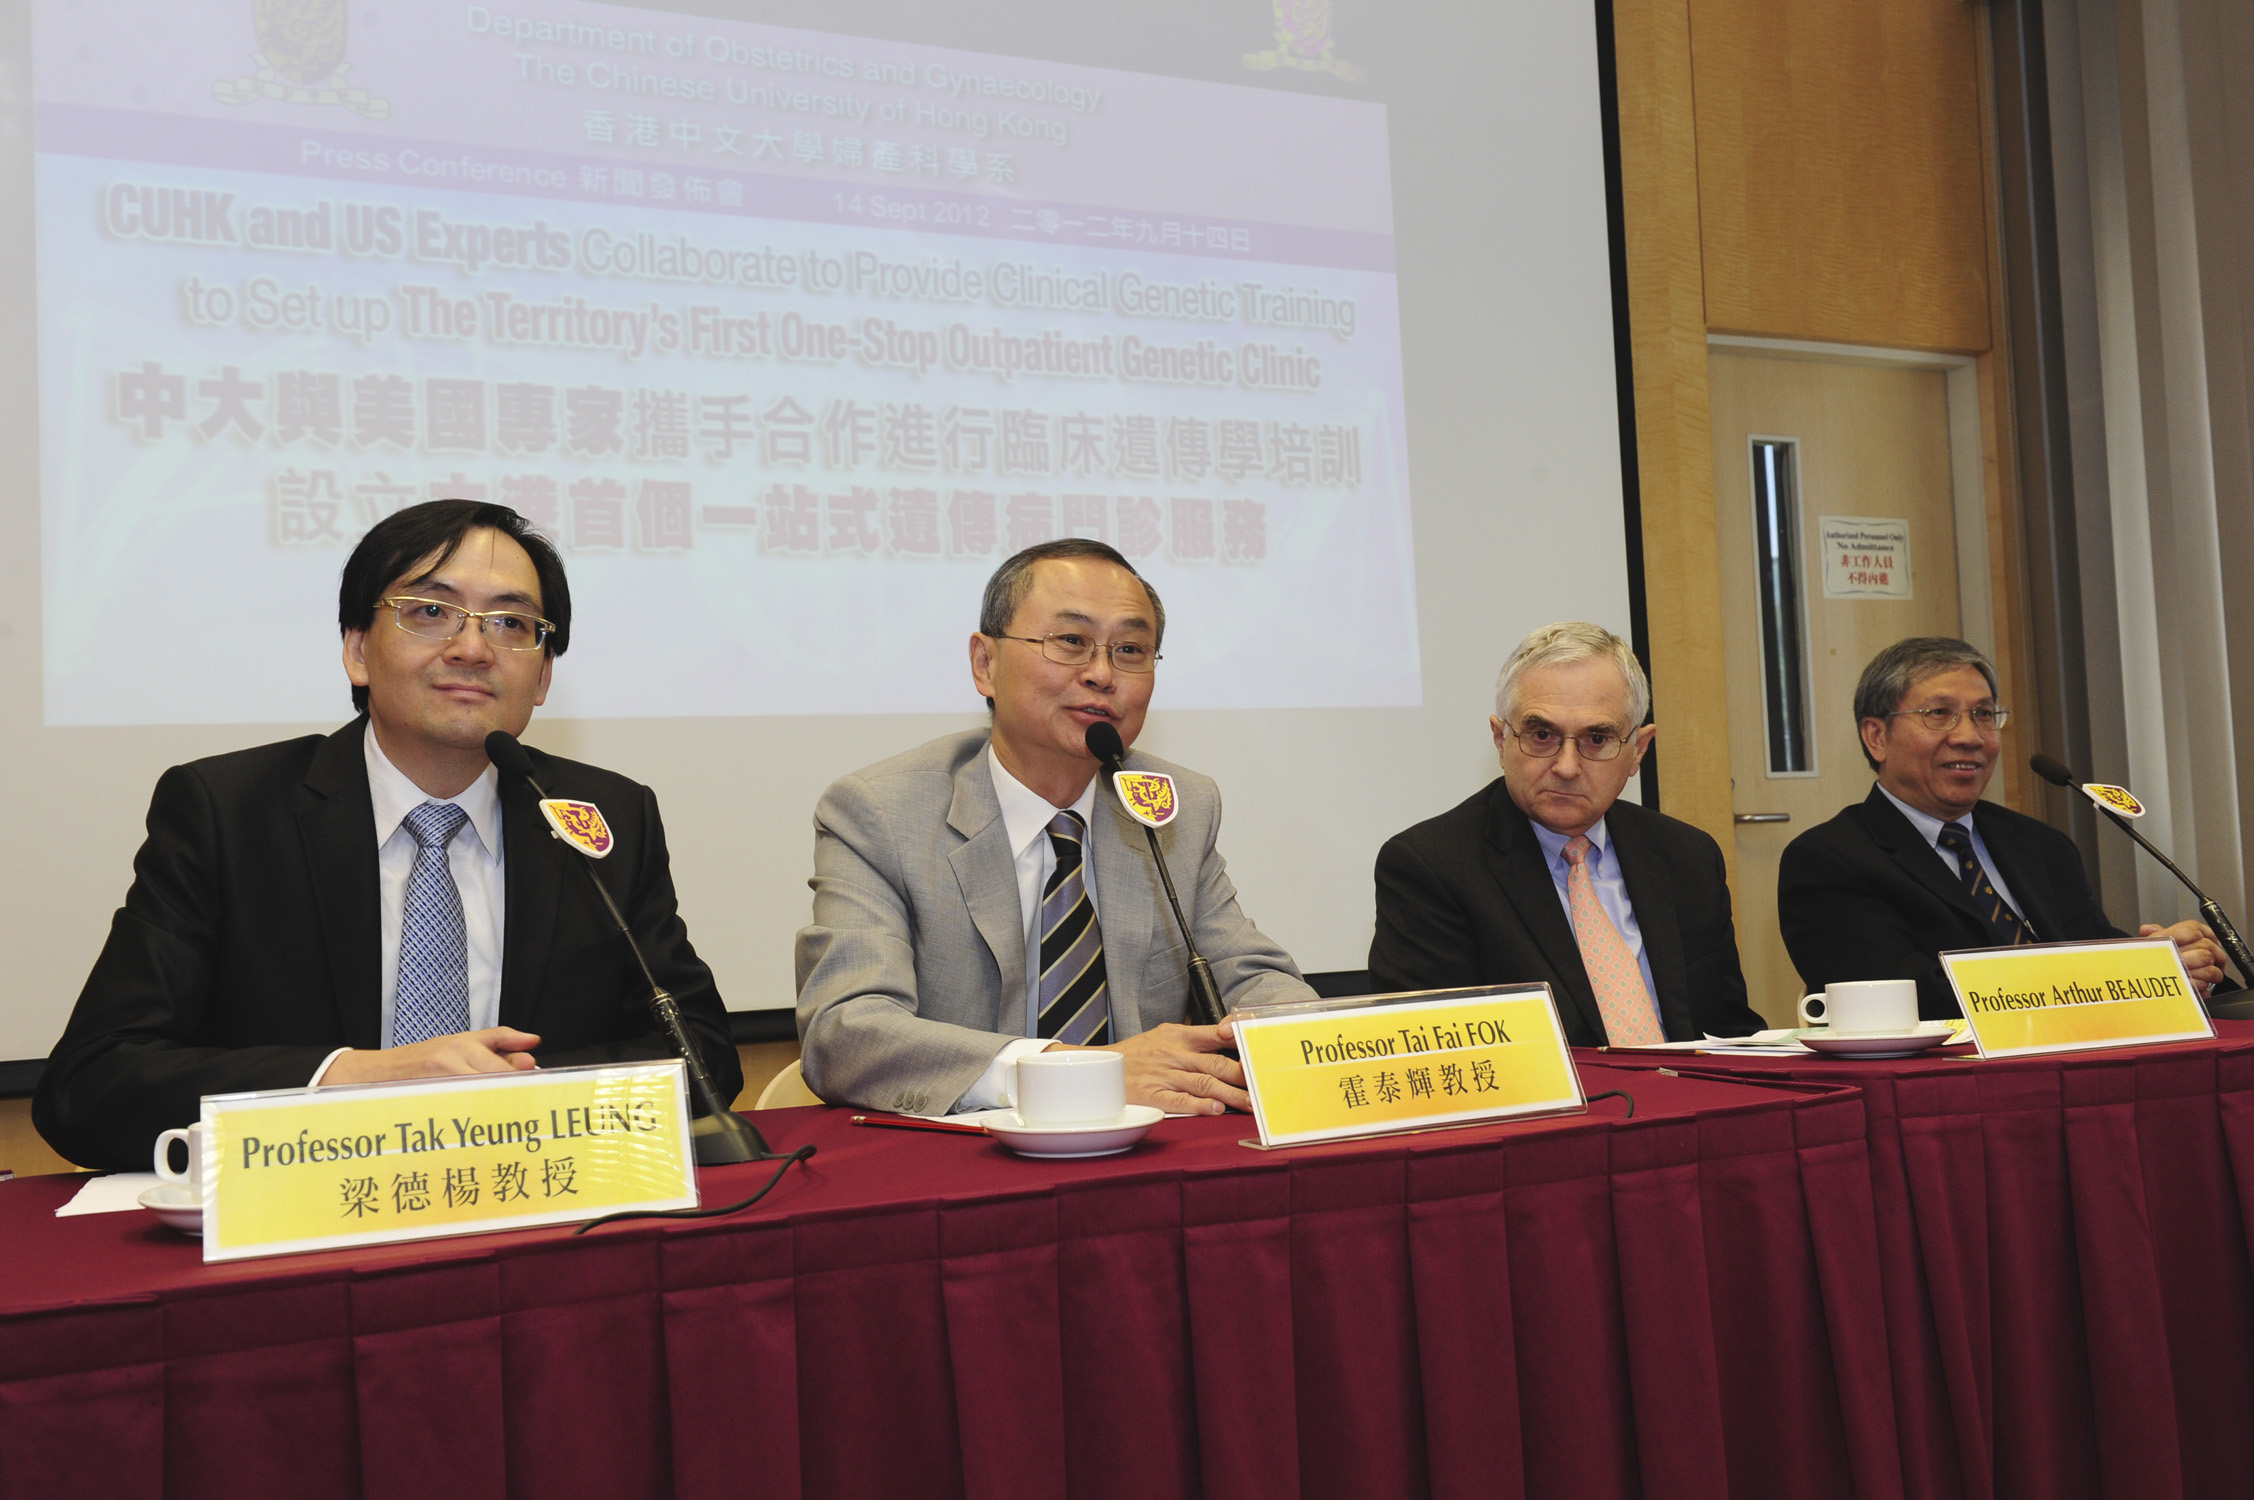 From left: Prof. Tak Yeung LEUNG, Professor, Department of Obstetrics and Gynaecology; Prof. Tai Fai FOK, Dean of Faculty of Medicine and Professor of Paediatrics; Prof. Arthur BEAUDET, Professor, Department of Molecular and Human Genetics, Baylor College of medicine of The United States of America; and Prof. Wai Yee CHAN, Director of School of Biomedical Sciences jointly announce the collaboration between CUHK and US experts to provide clinical genetic training for set up the territory's first one-stop outpatient genetic clinic